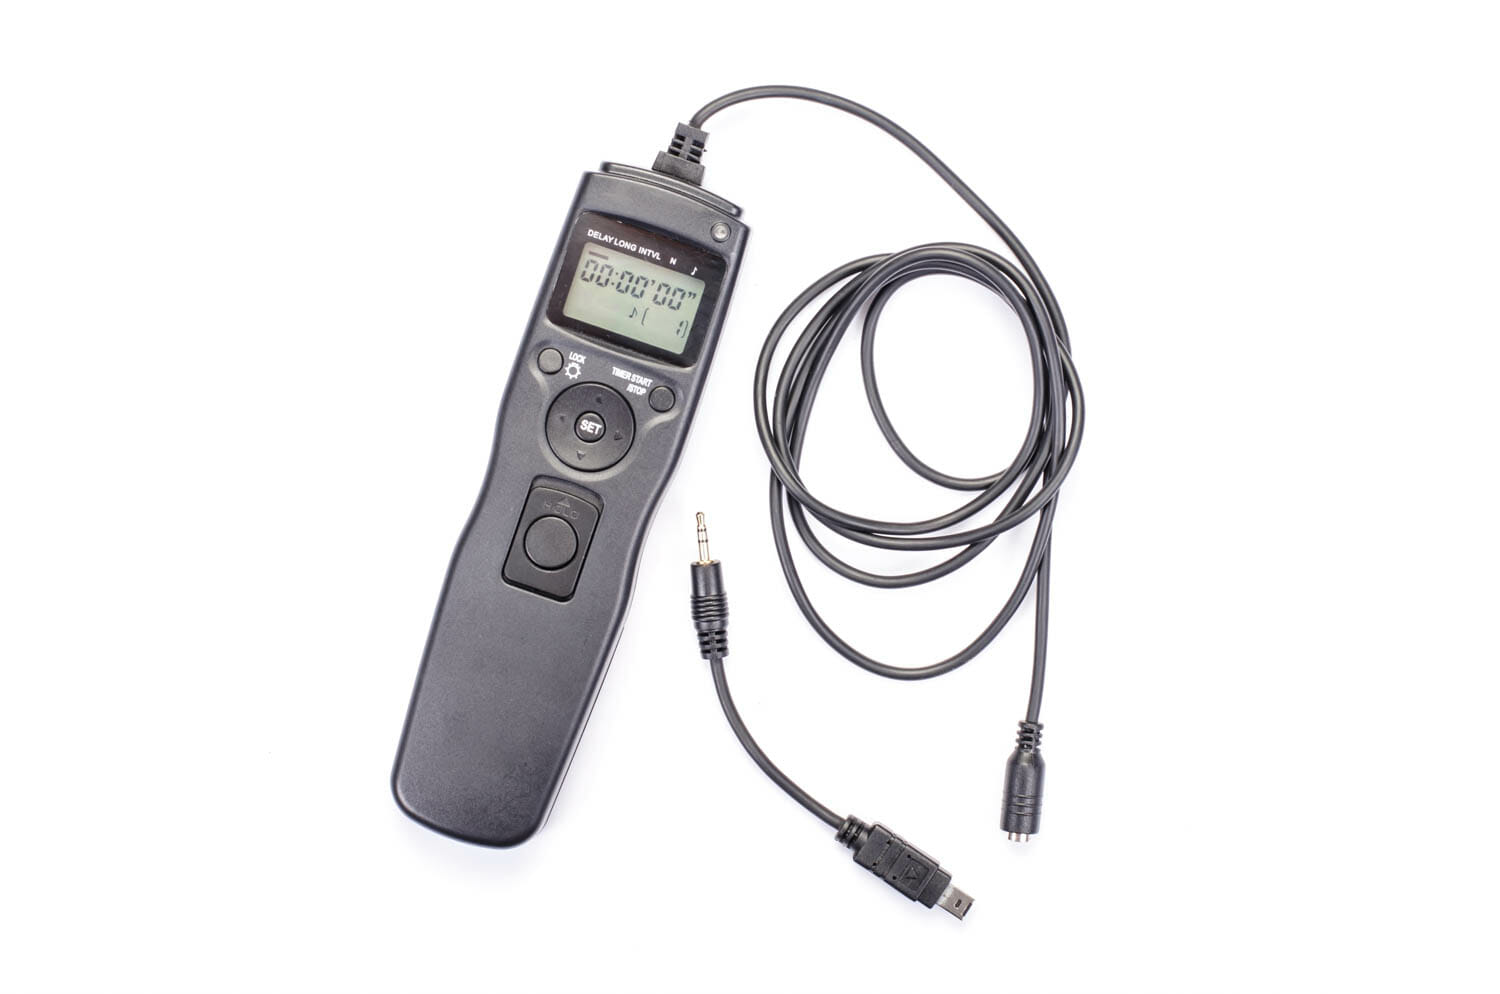 A camera's remote shutter release with a cable